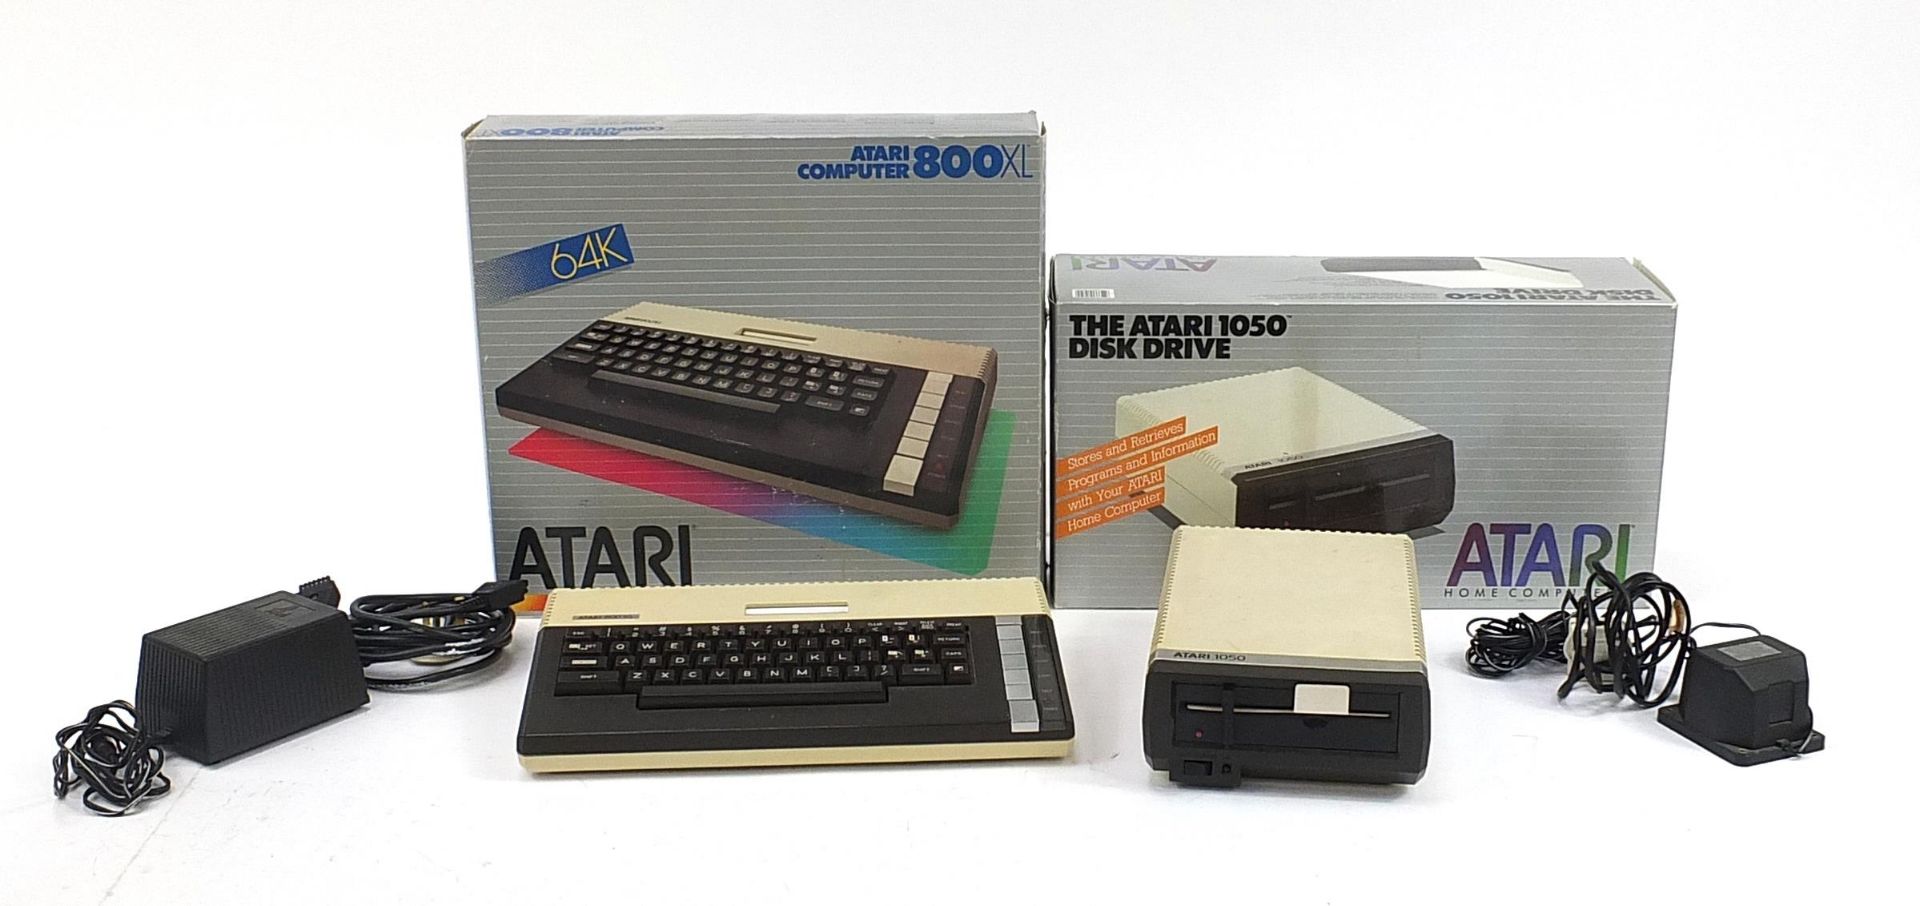 Atari 800XL computer and 1050 disc drive with boxes